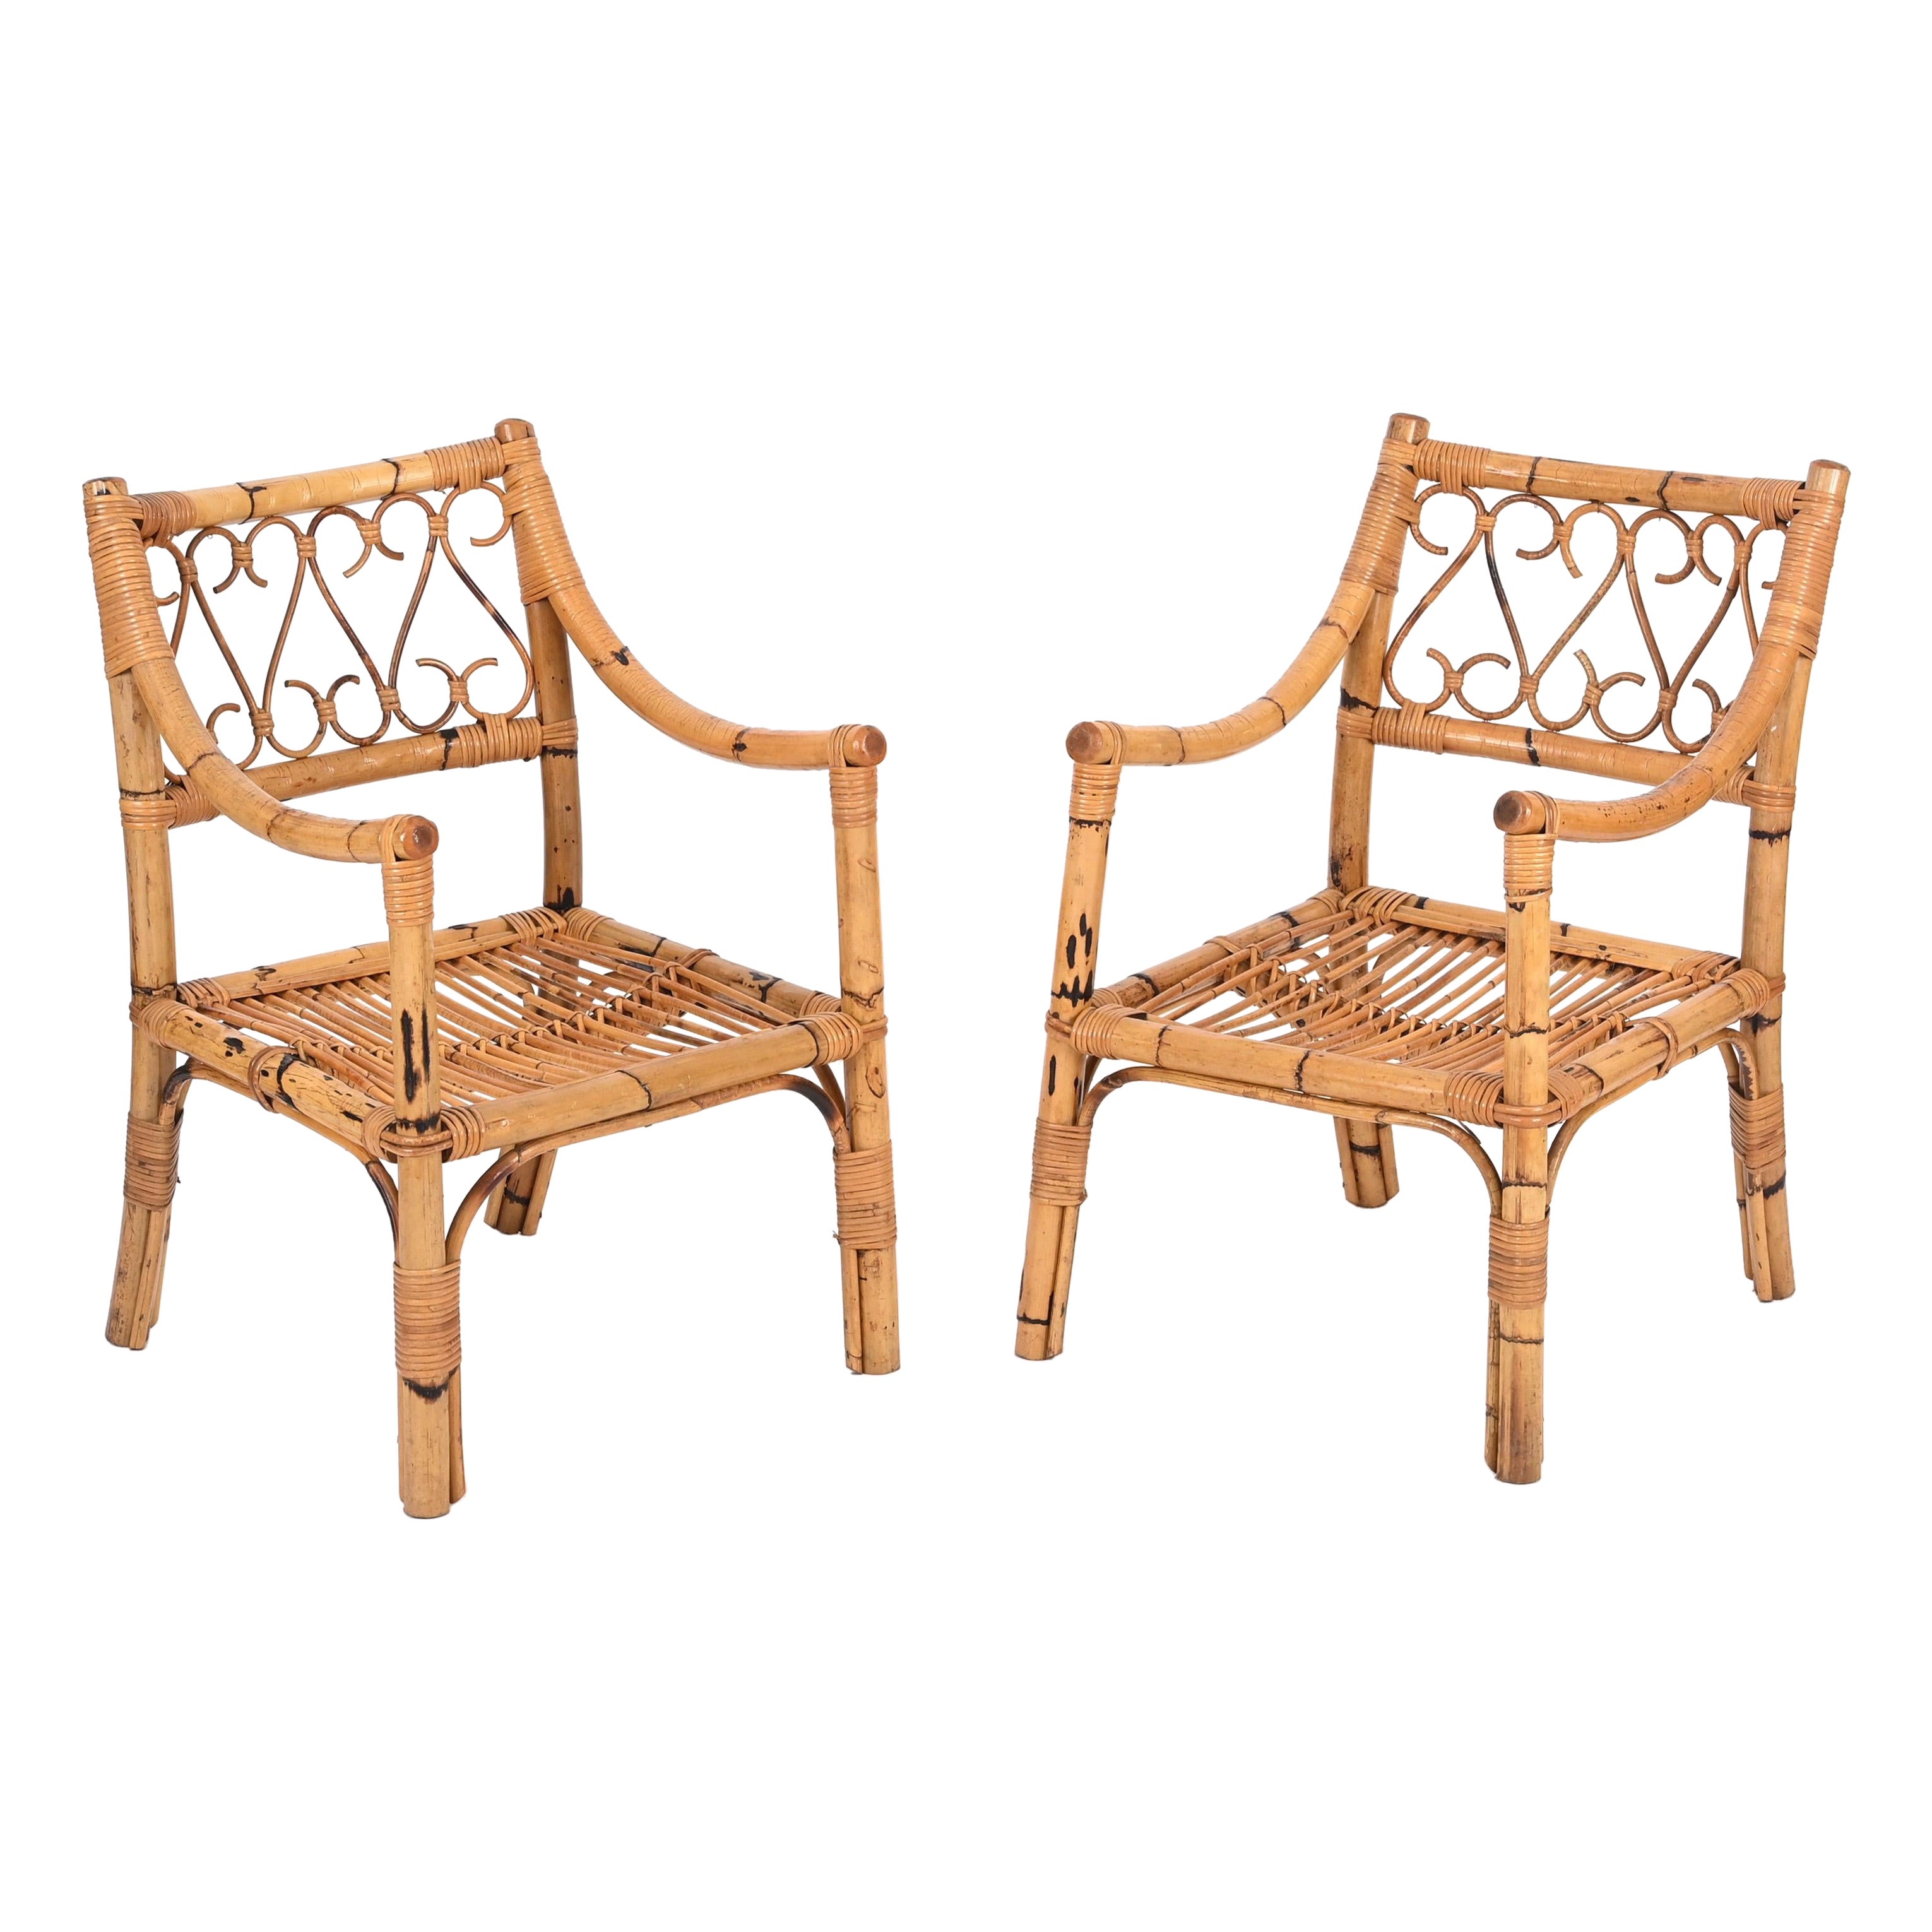 Pair of Vivai del Sud Mid-Century Armchairs in Bamboo and Rattan, Italy 1970s For Sale